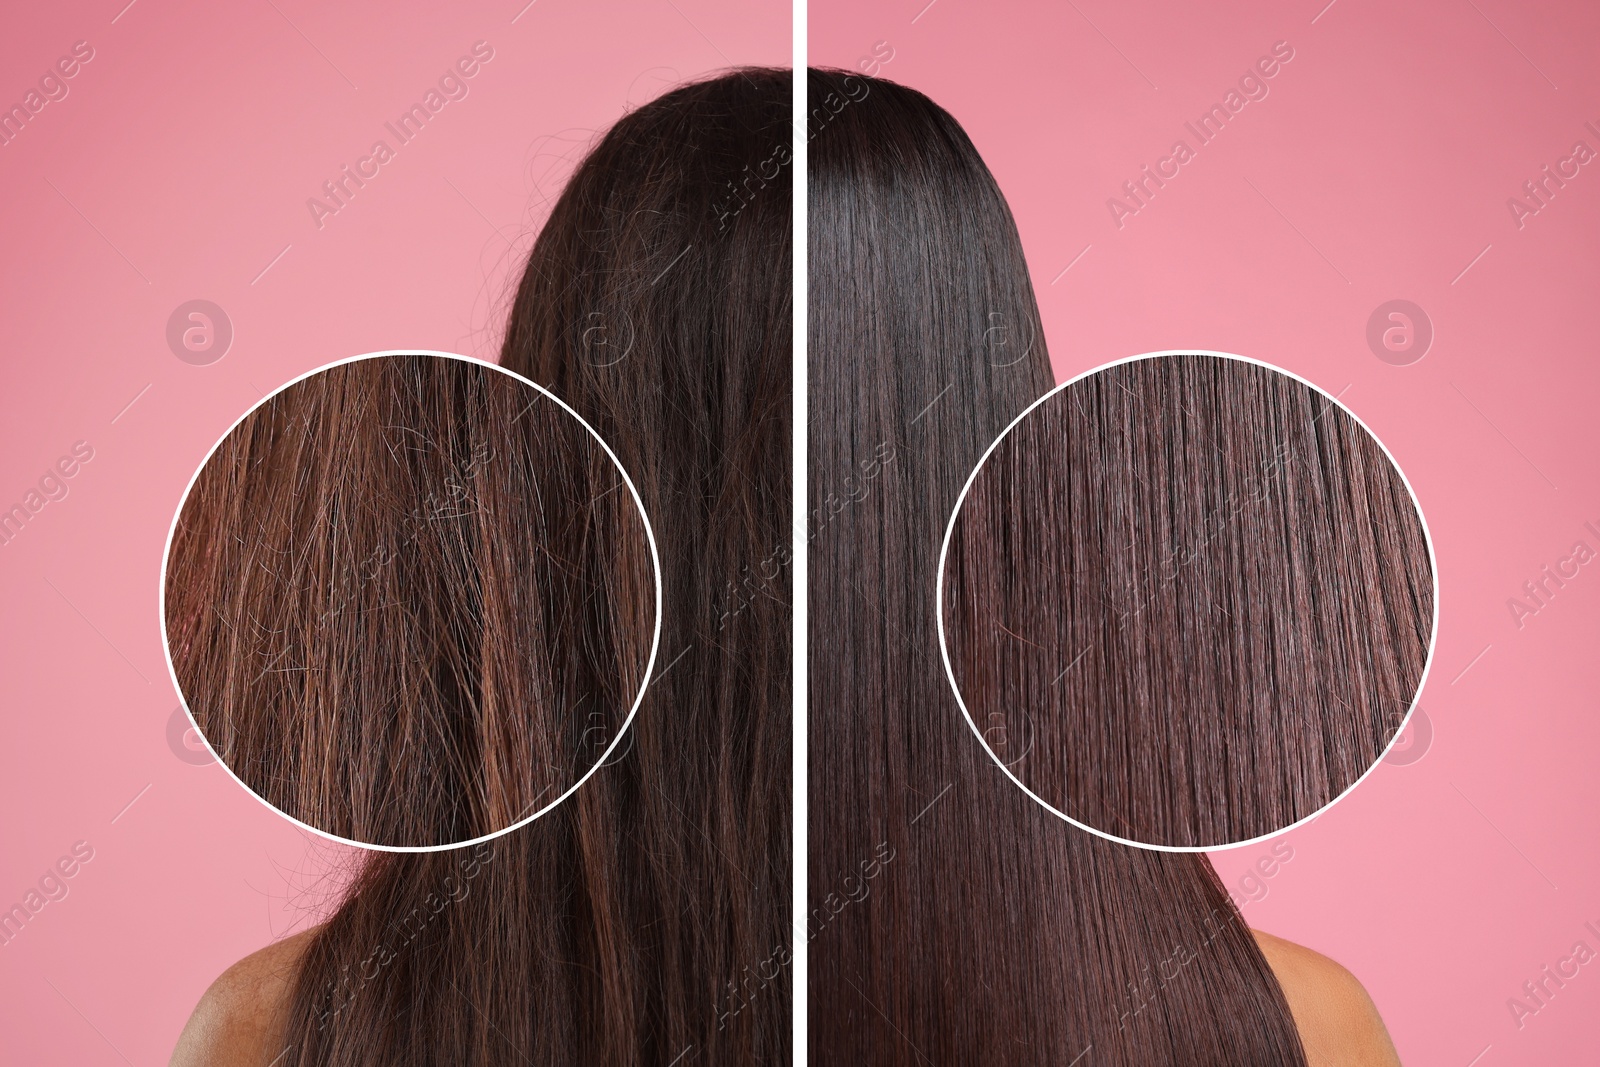 Image of Photo of woman divided into halves before and after hair treatment on pink background, back view. Zoomed area showing damaged and healthy strand